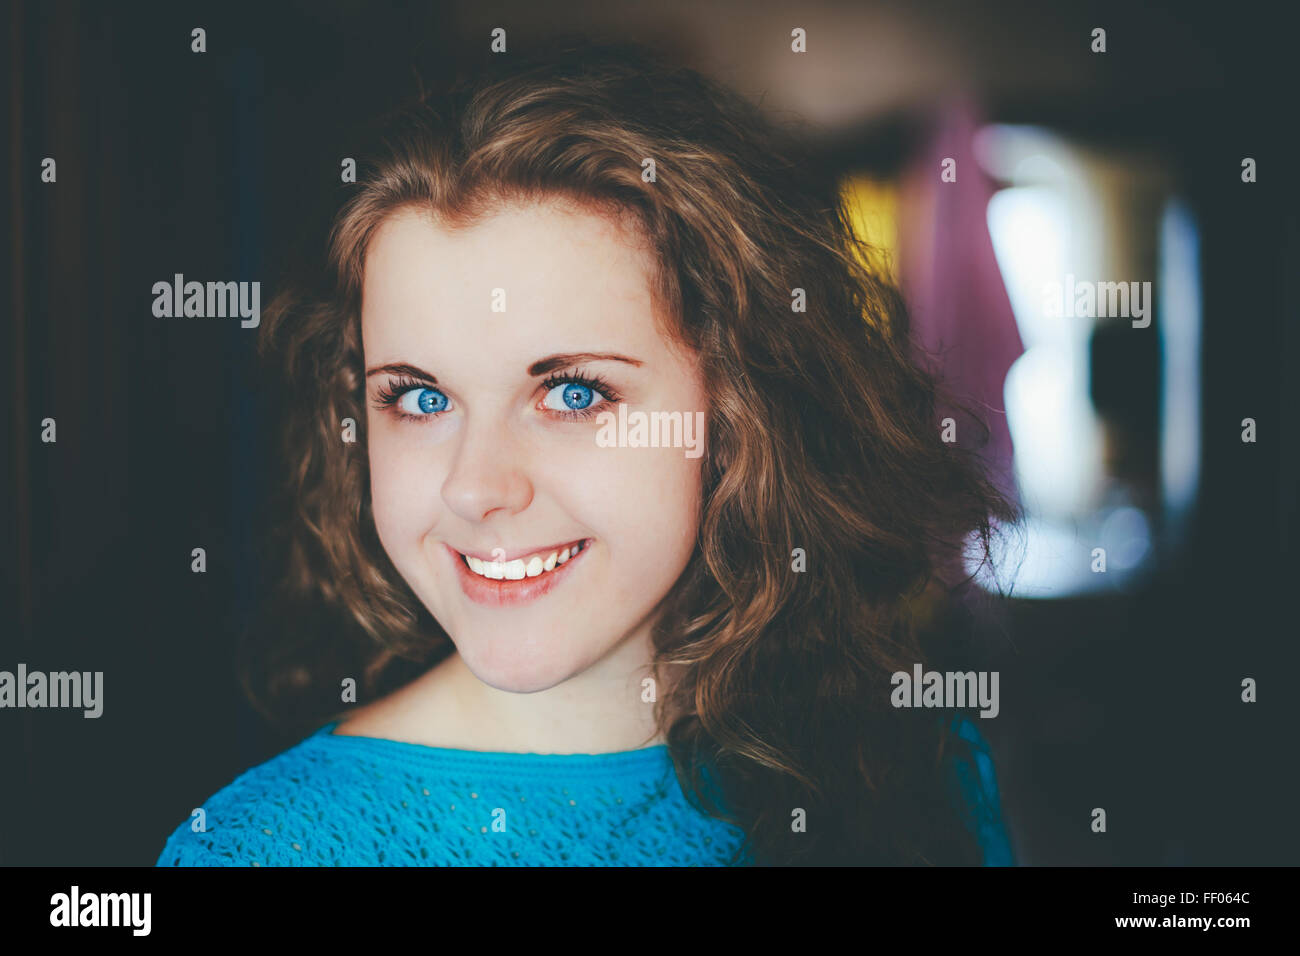 Portrait Of Beautiful Plus Size Young Woman In Blue Blouse Opening Door In Home, Looking Very Happy Stock Photo